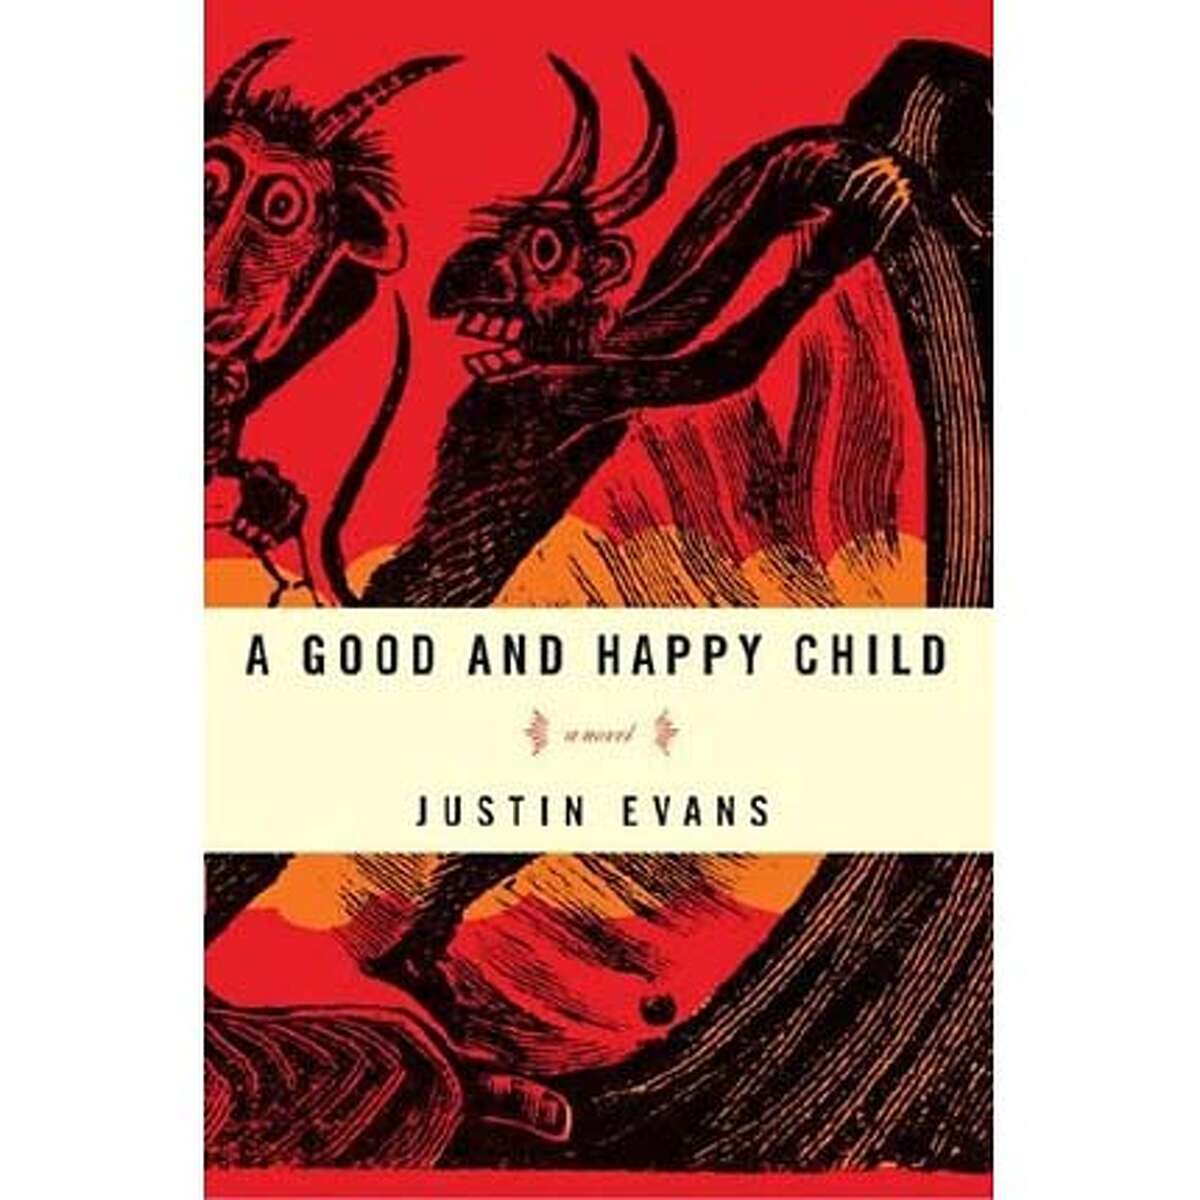 "A Good and Happy Child" by Justin Evans.